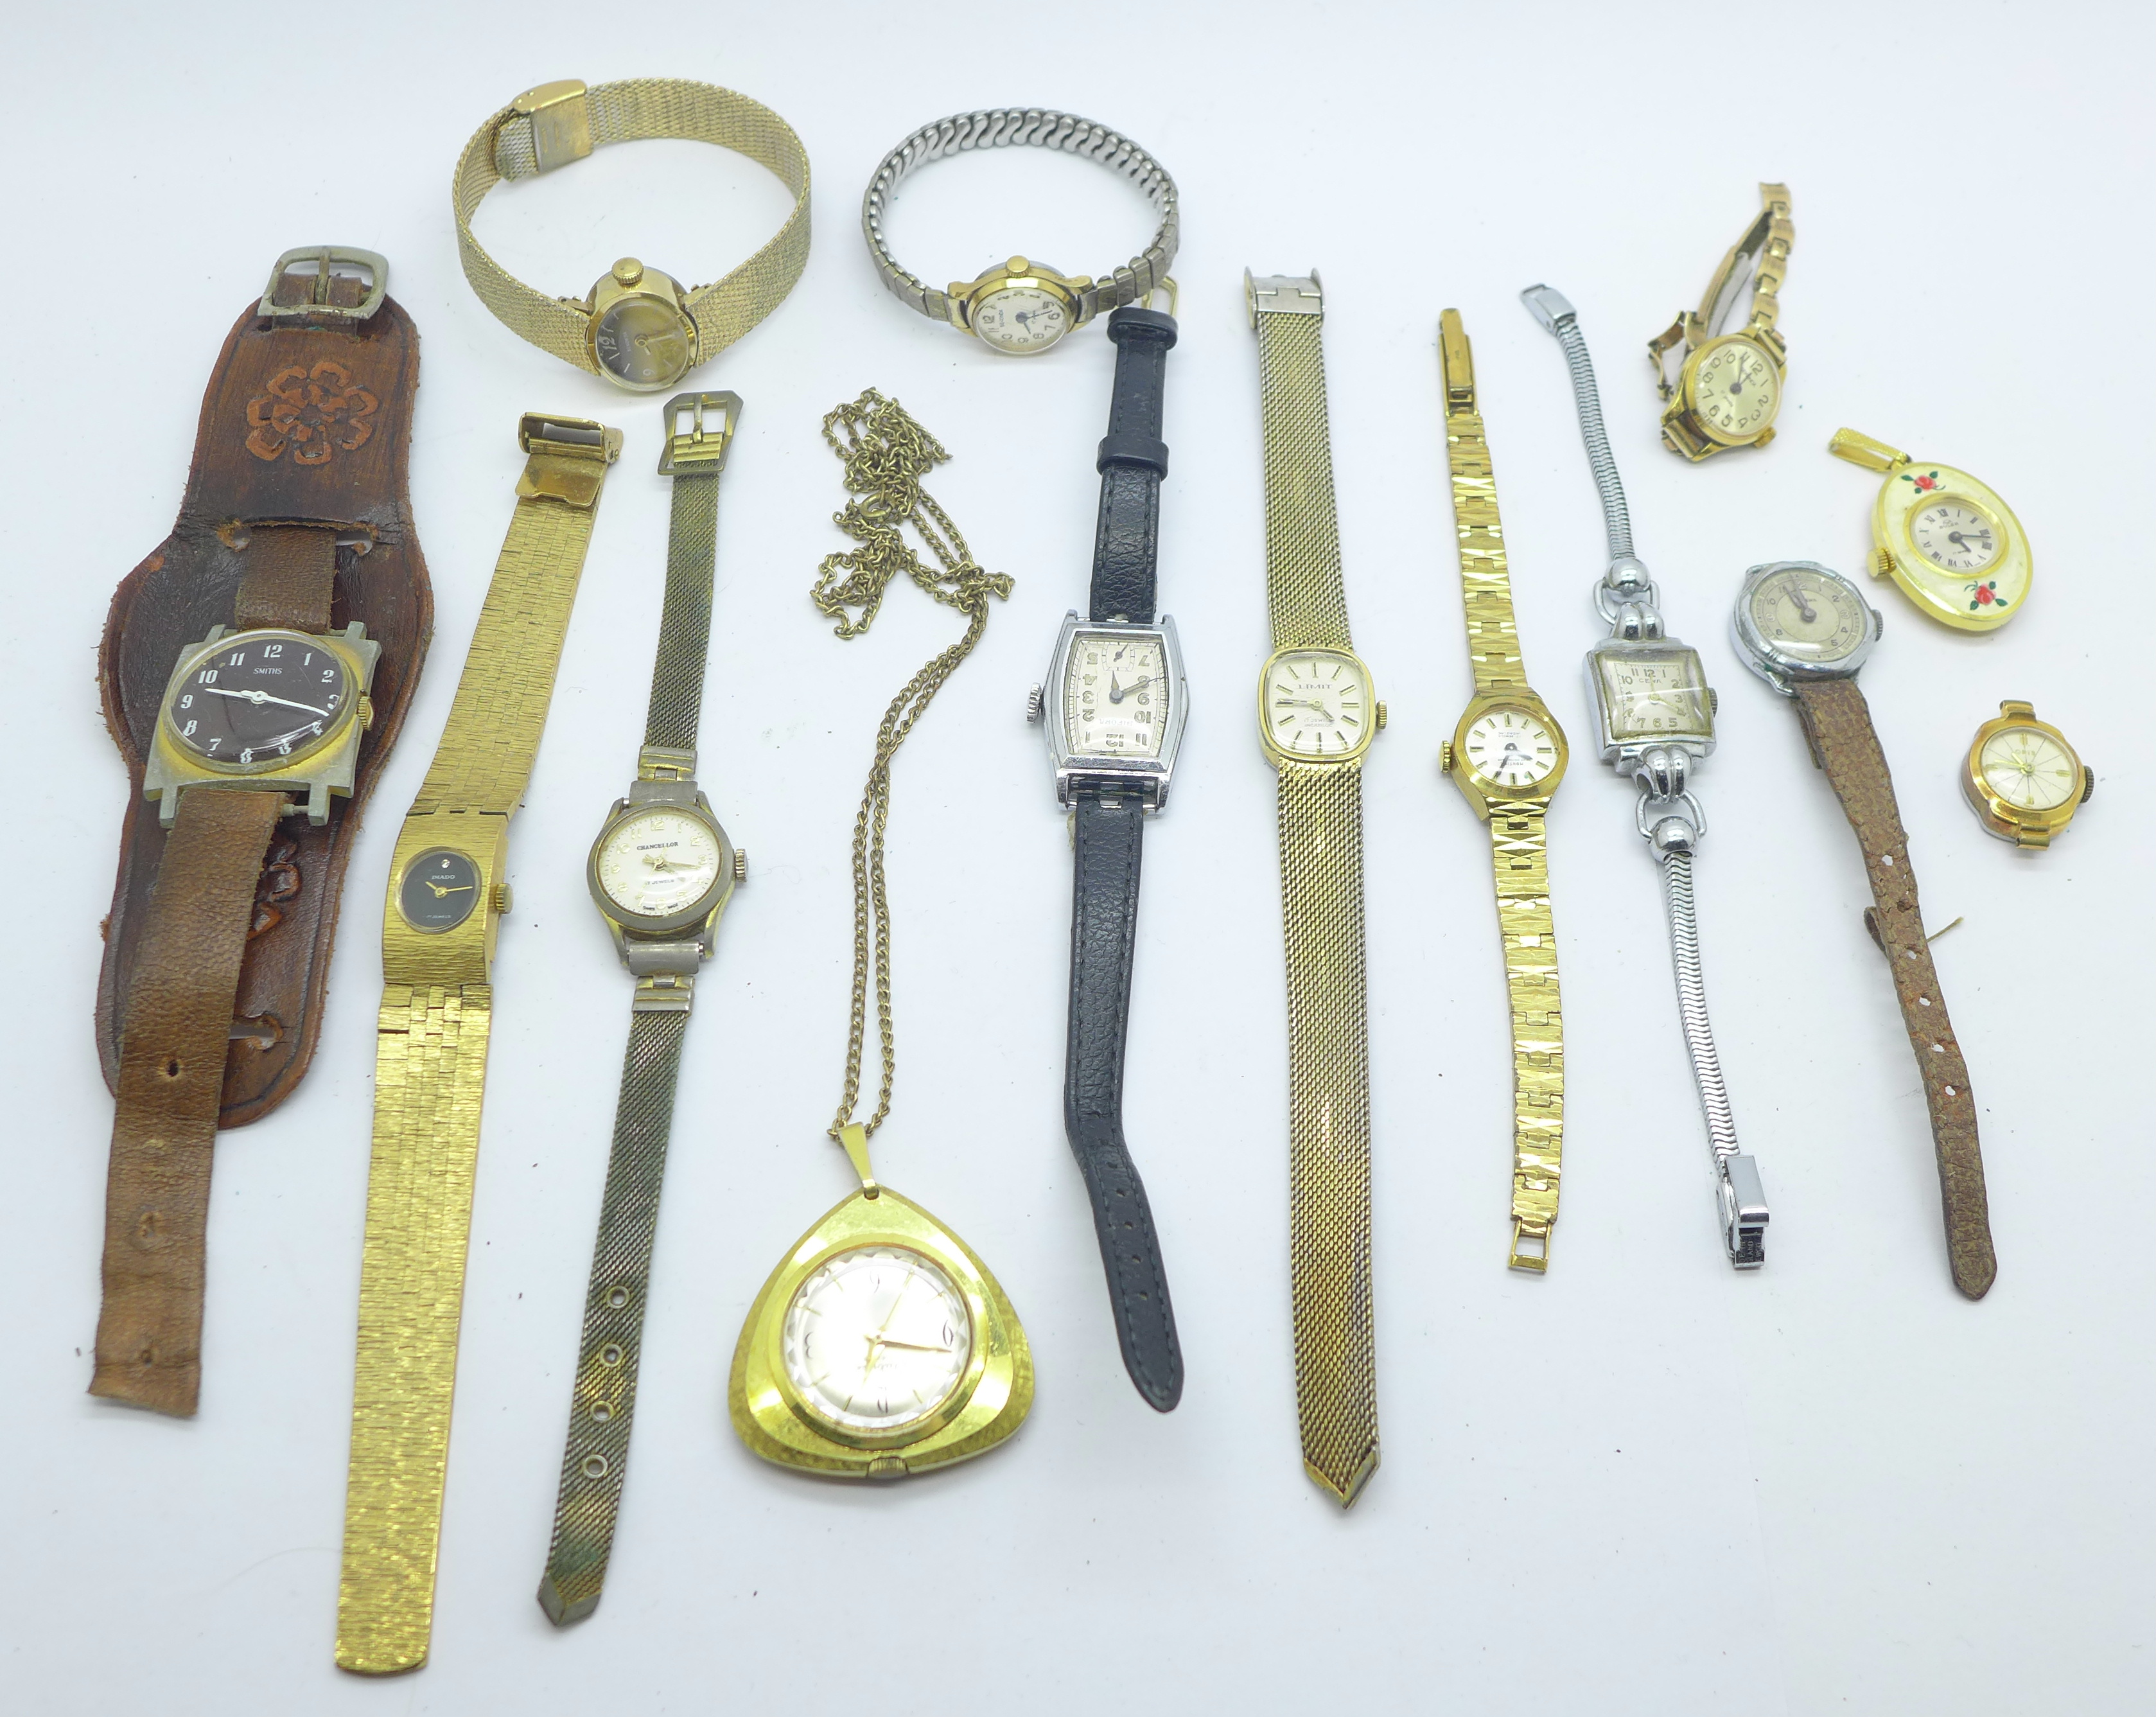 Fourteen manual wind wristwatches and pendant watches including Buler, Bifora, Smiths, etc.